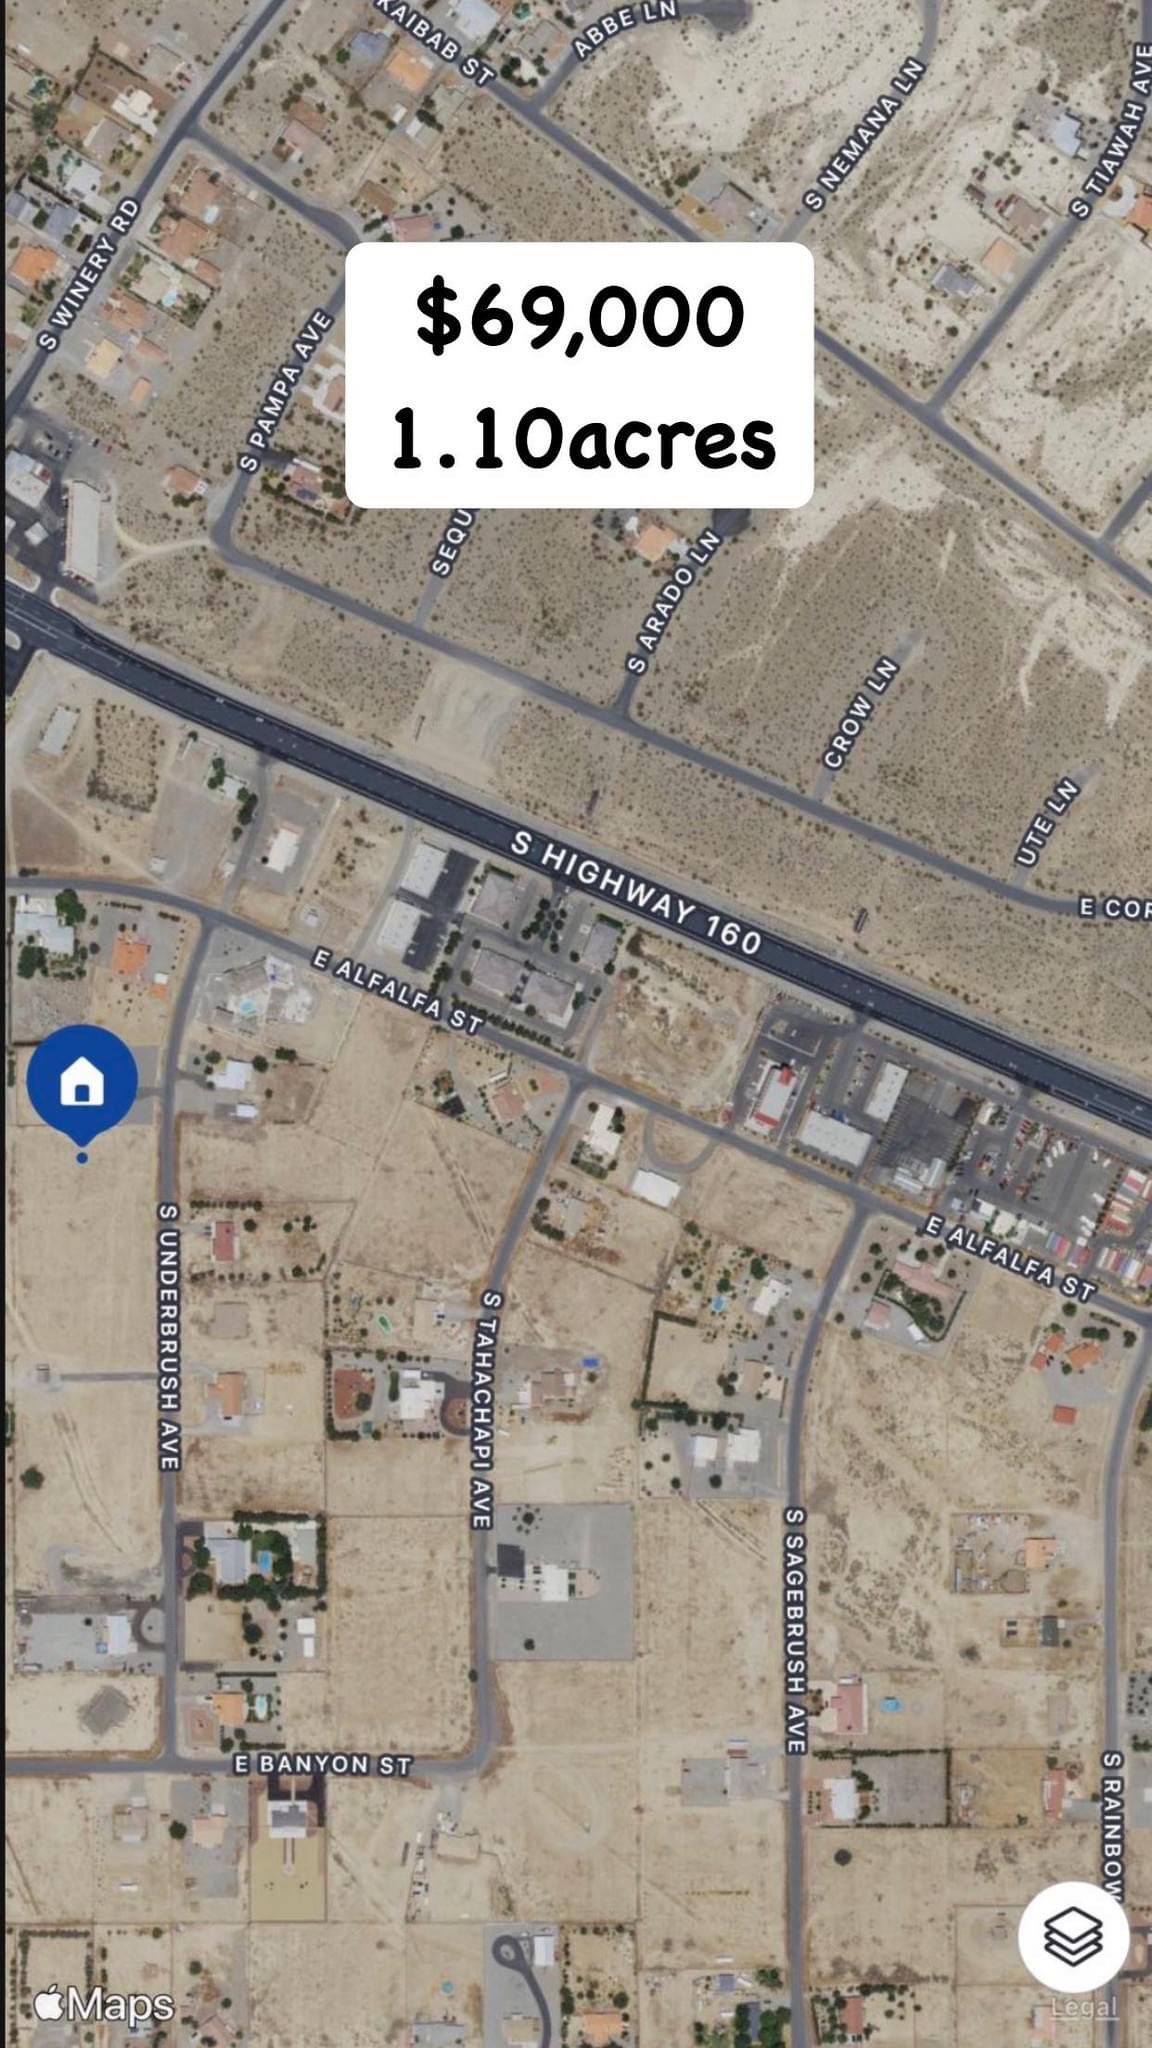 FOR SALE BY OWNER 1.10 ACRE LOT IN PAHRUMP 